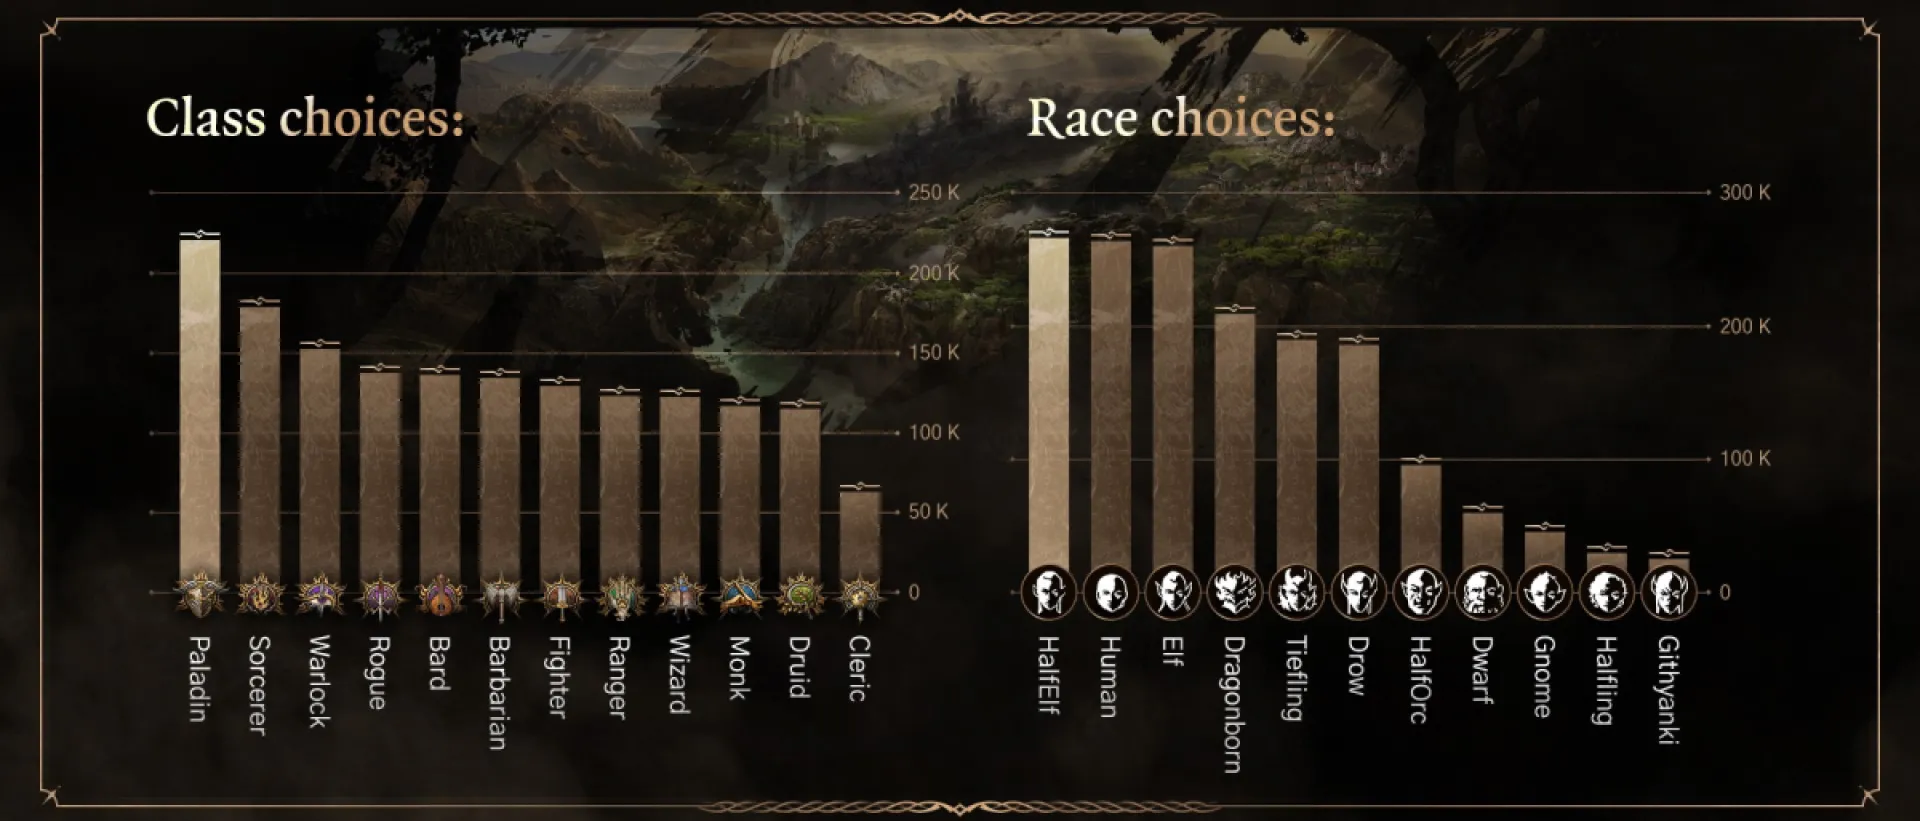 Top class and race picks for the first week release of Baldur's Gate III.